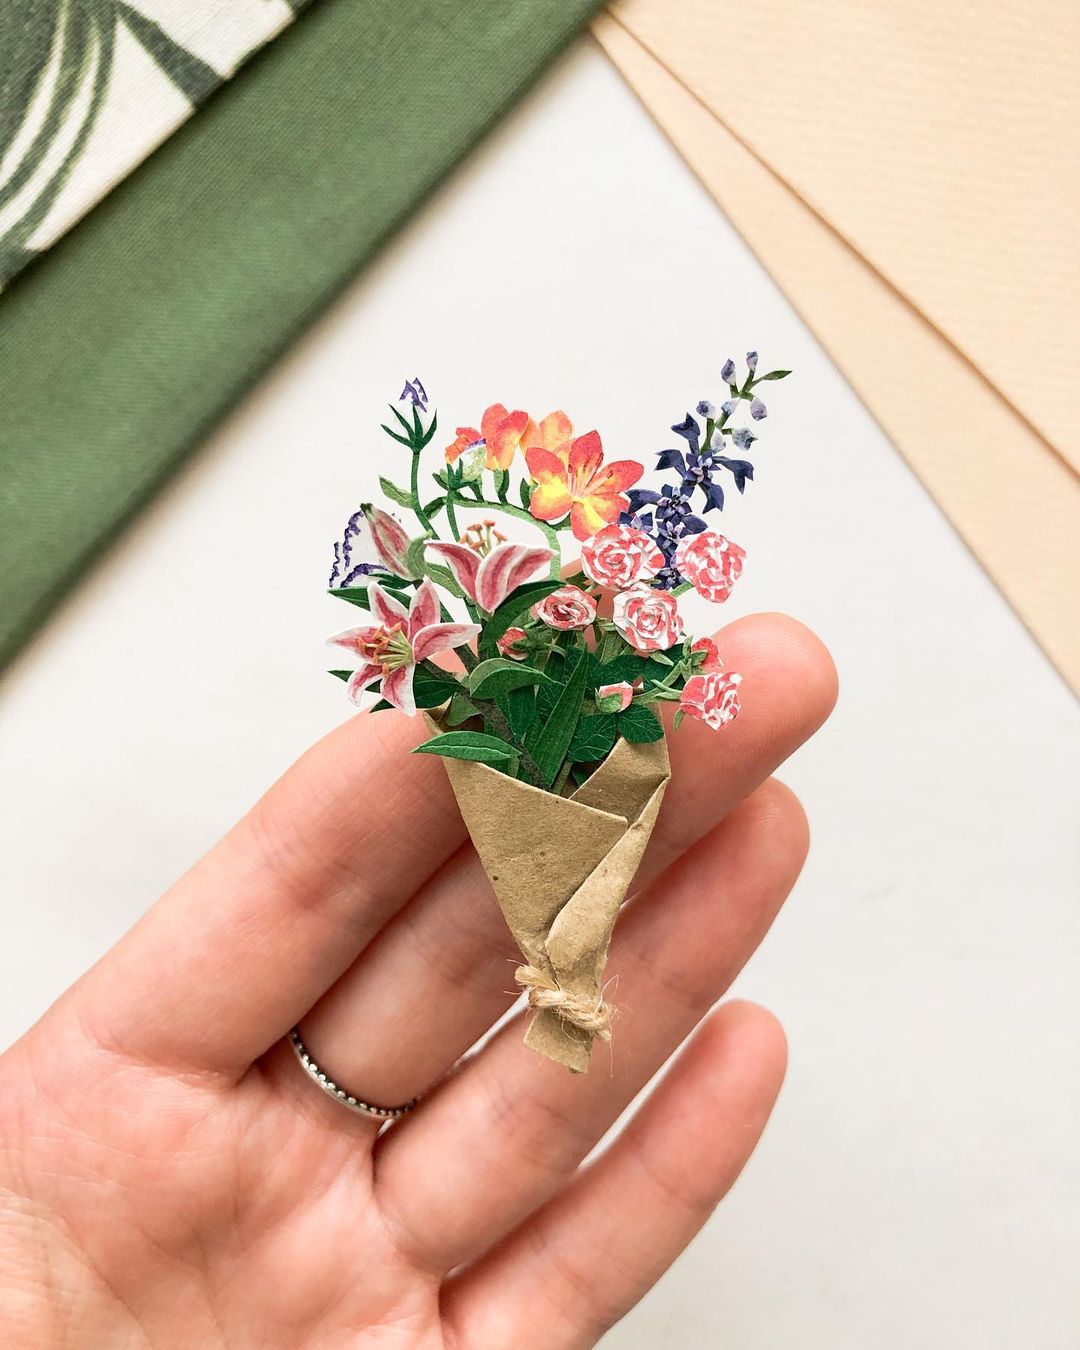 Tania Lissova's Endearing Tiny Paper Plants Will Stay In Bloom Forever